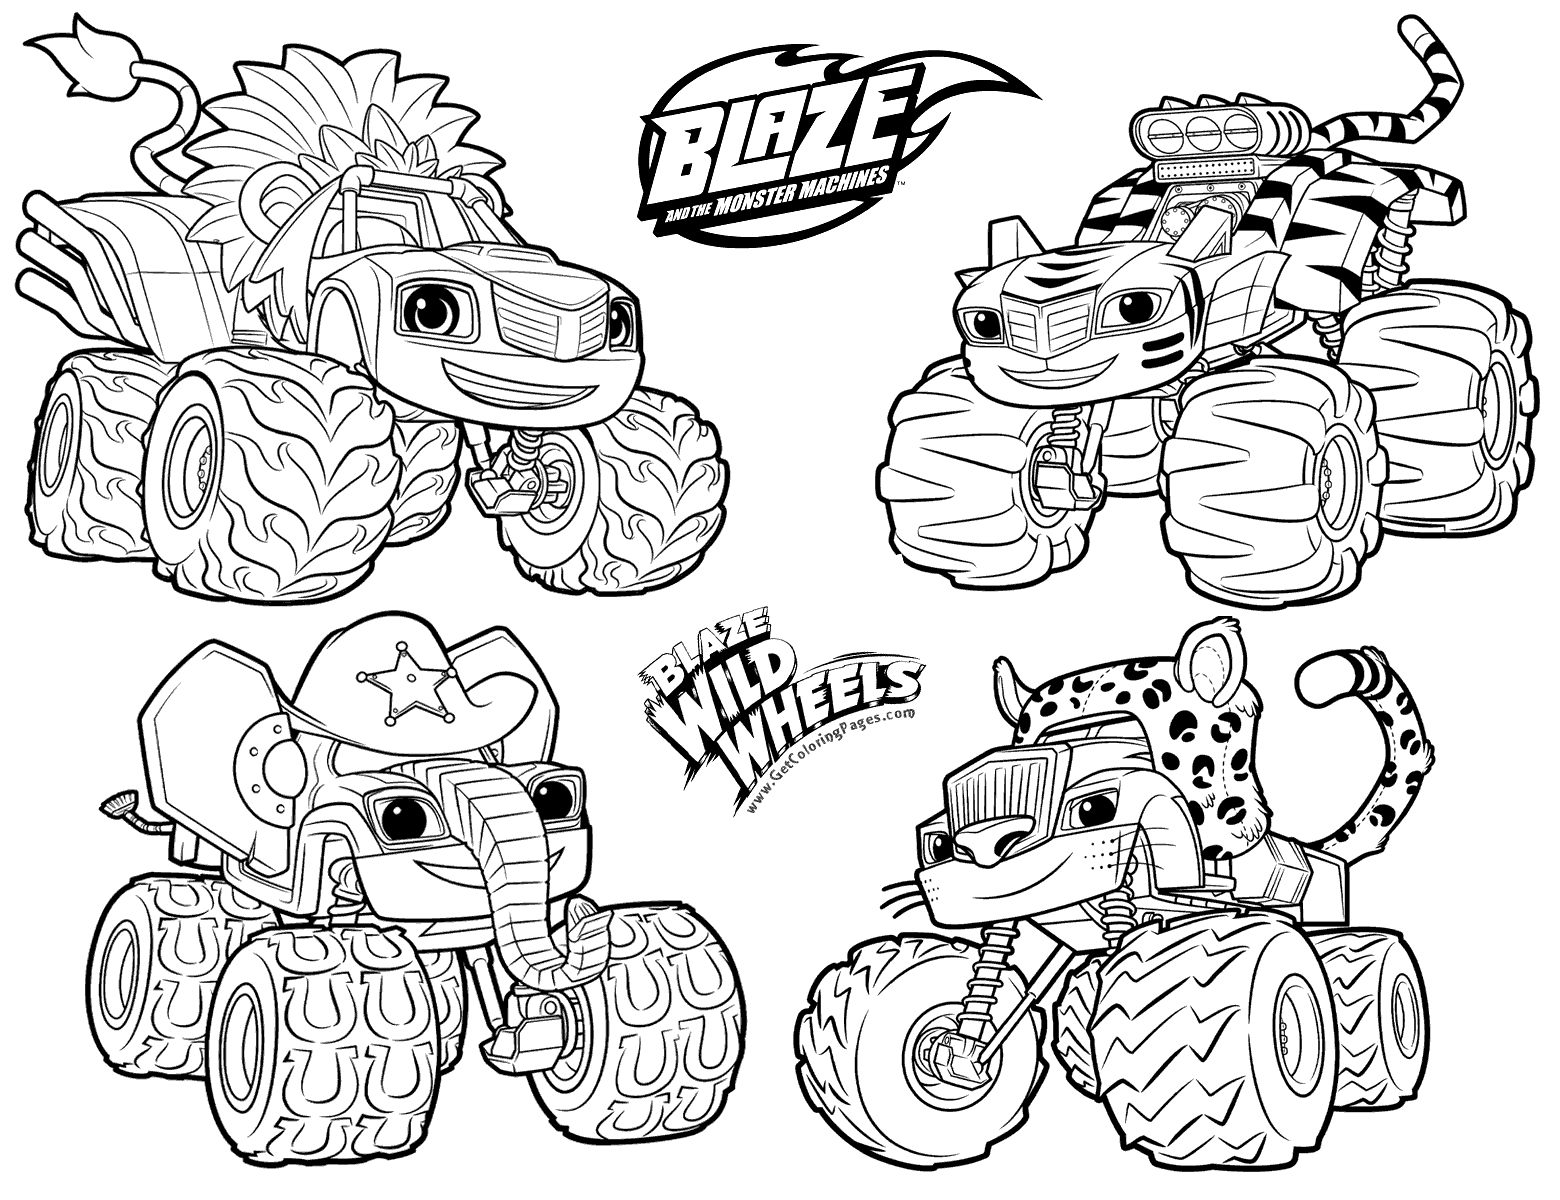 Blaze And The Monster Machines Coloring Pages at GetDrawings | Free ...